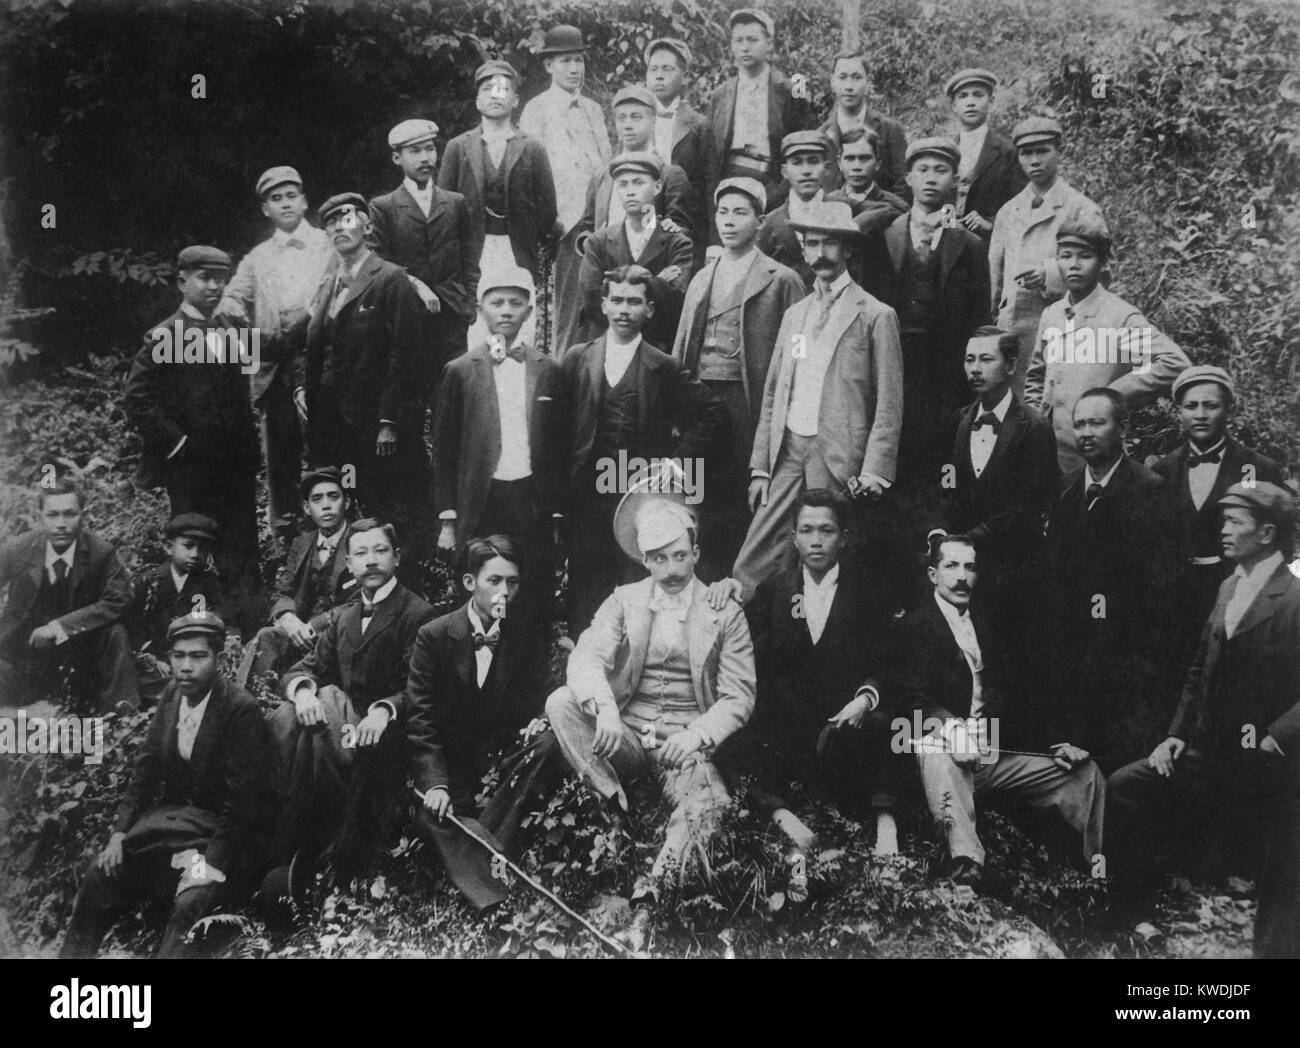 Philippine nationalists, including Emilio Aguinaldo (first row, 3rd from right), ca. 1896-97. In August 1896 an anti-colonialist insurgency began against Spanish rule, during which the rebels elected Aguinaldo as the president of the First Philippine Republic on March 22, 1897 (BSLOC 2017 10 68) Stock Photo